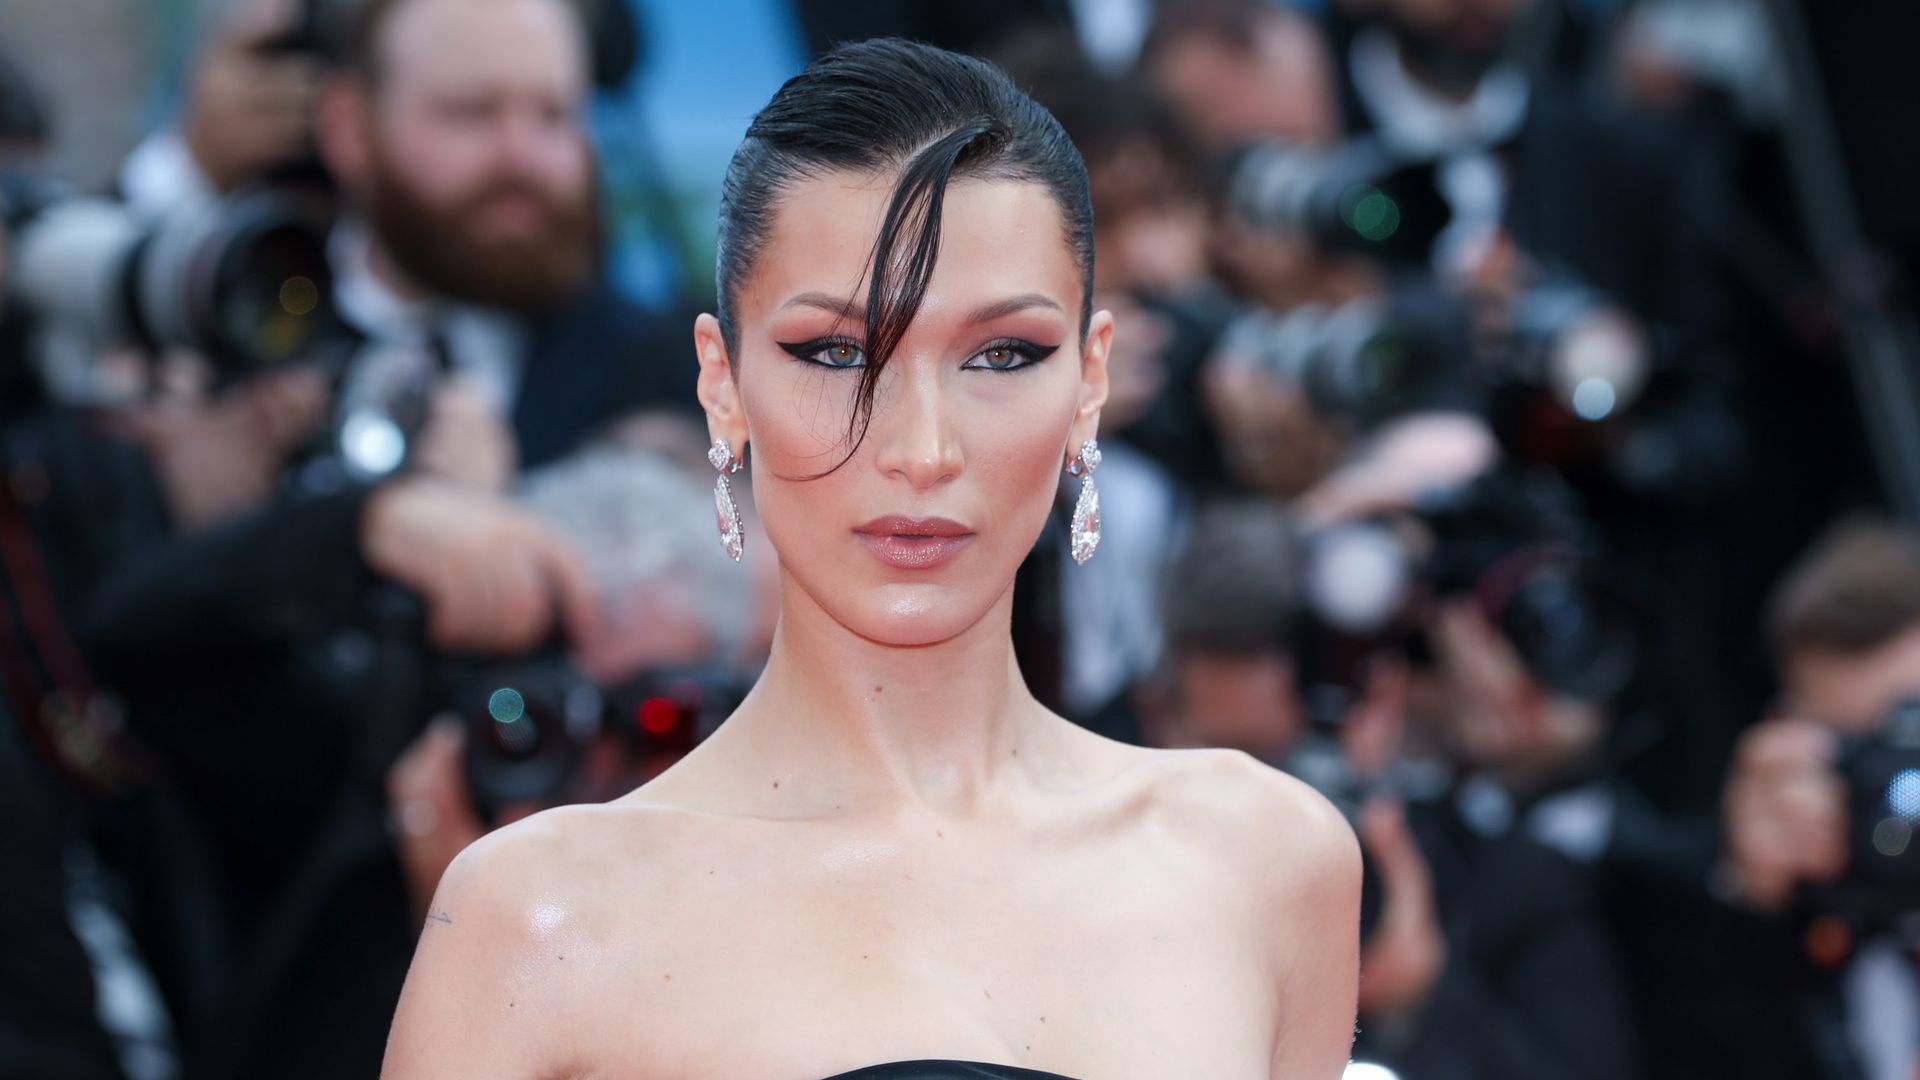 Bella Hadid in a black strapless dress on the red carpet 